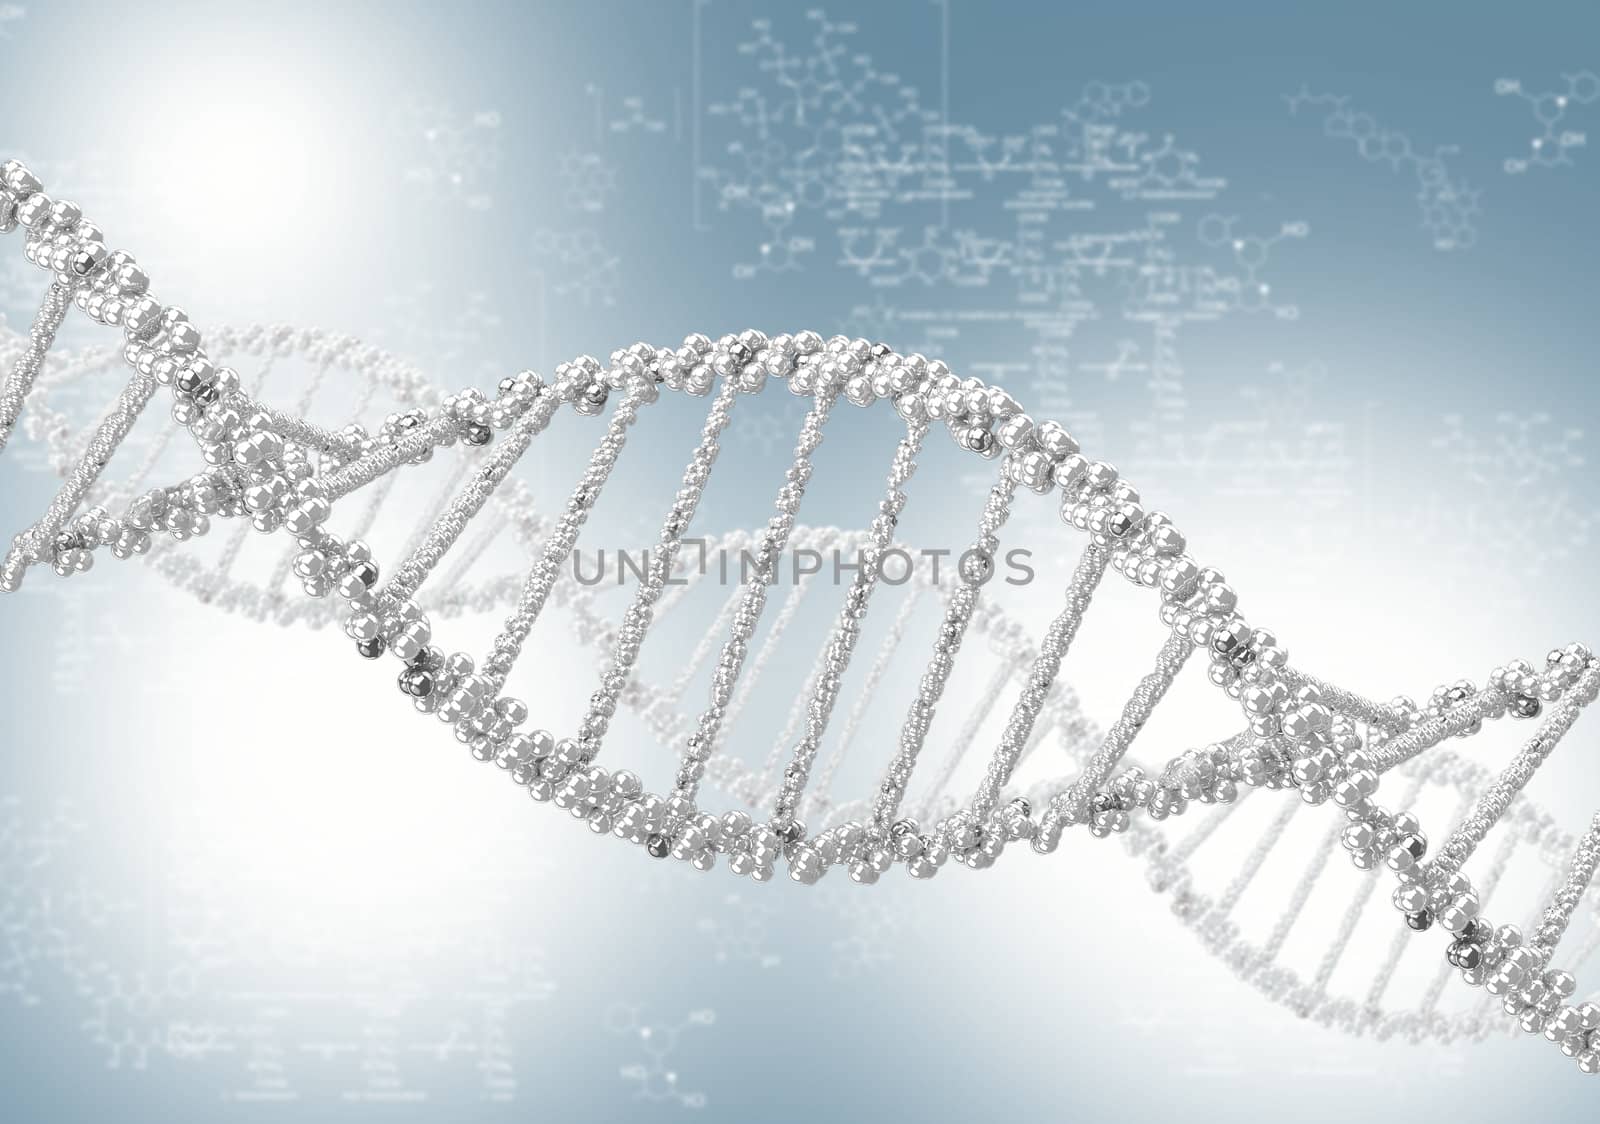 DNA helix against the colored background, scientific conceptual background